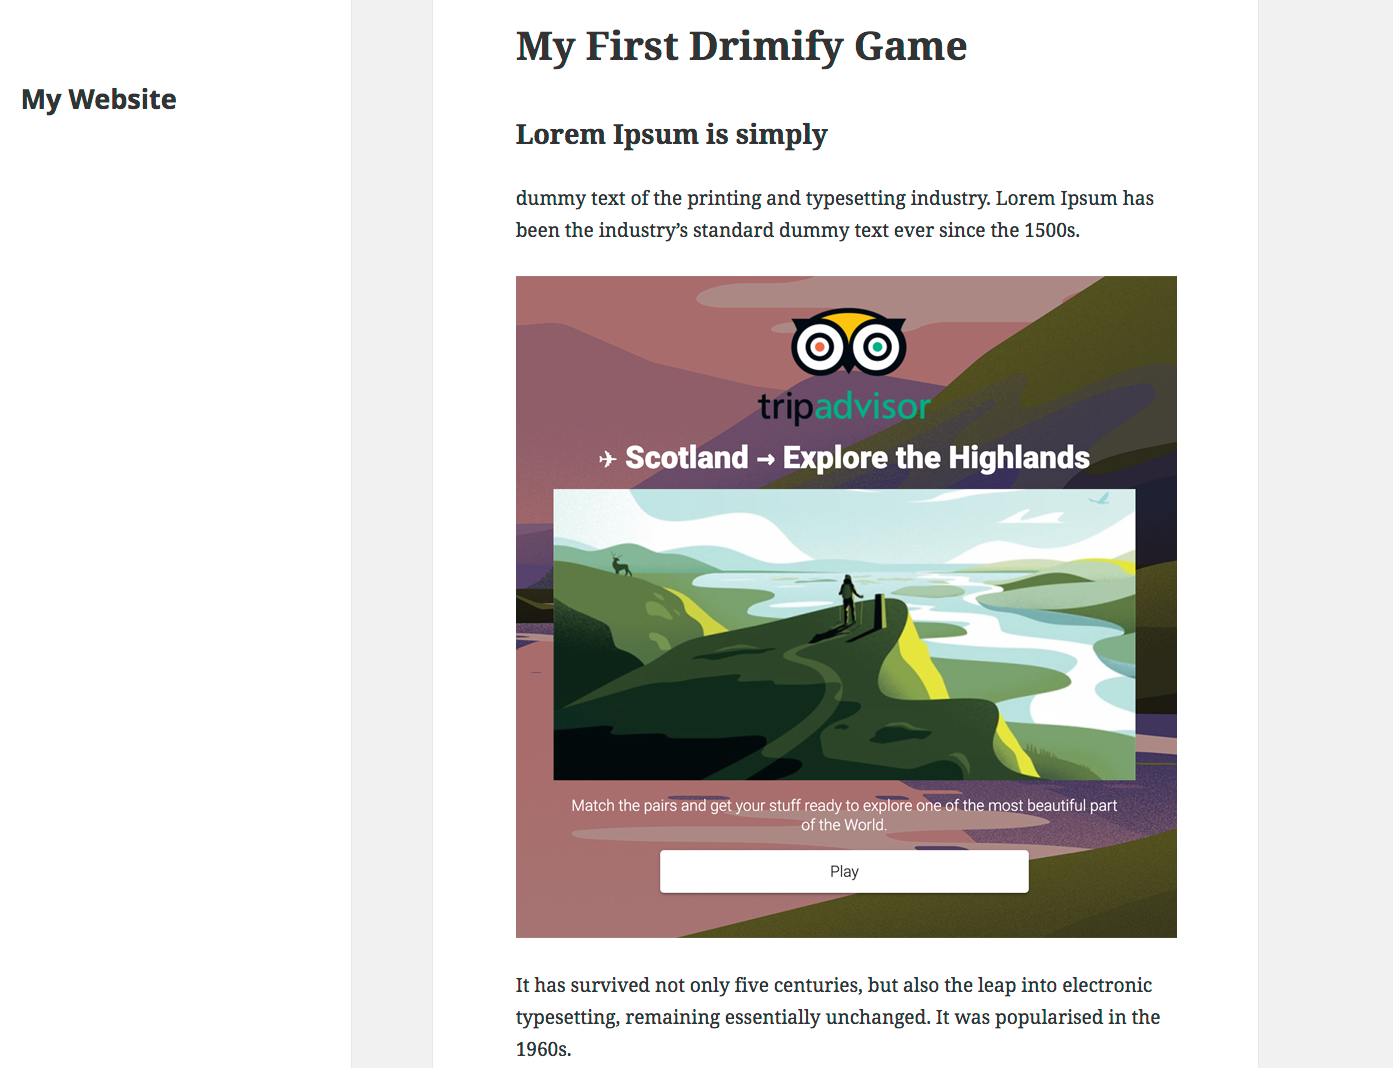 Once pasted in your post/page, your game will show